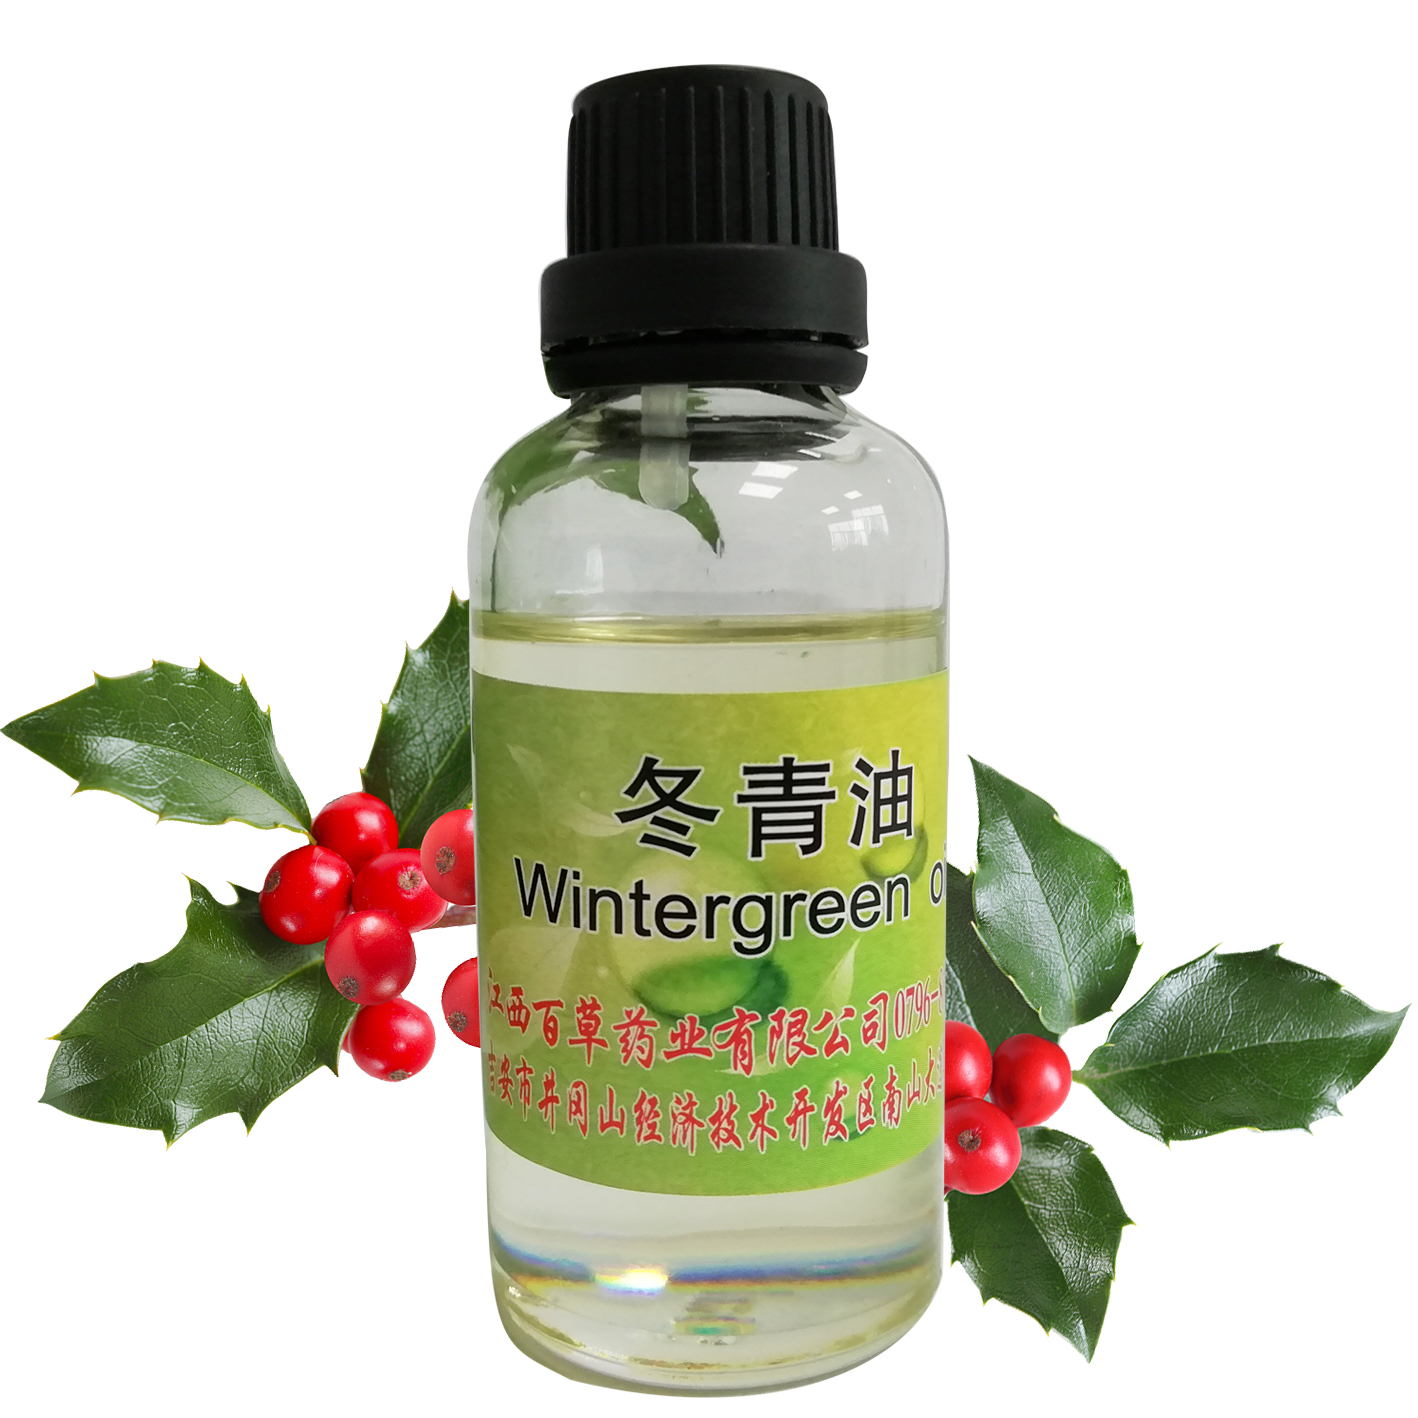 Wintergreen oil for skincare and health products